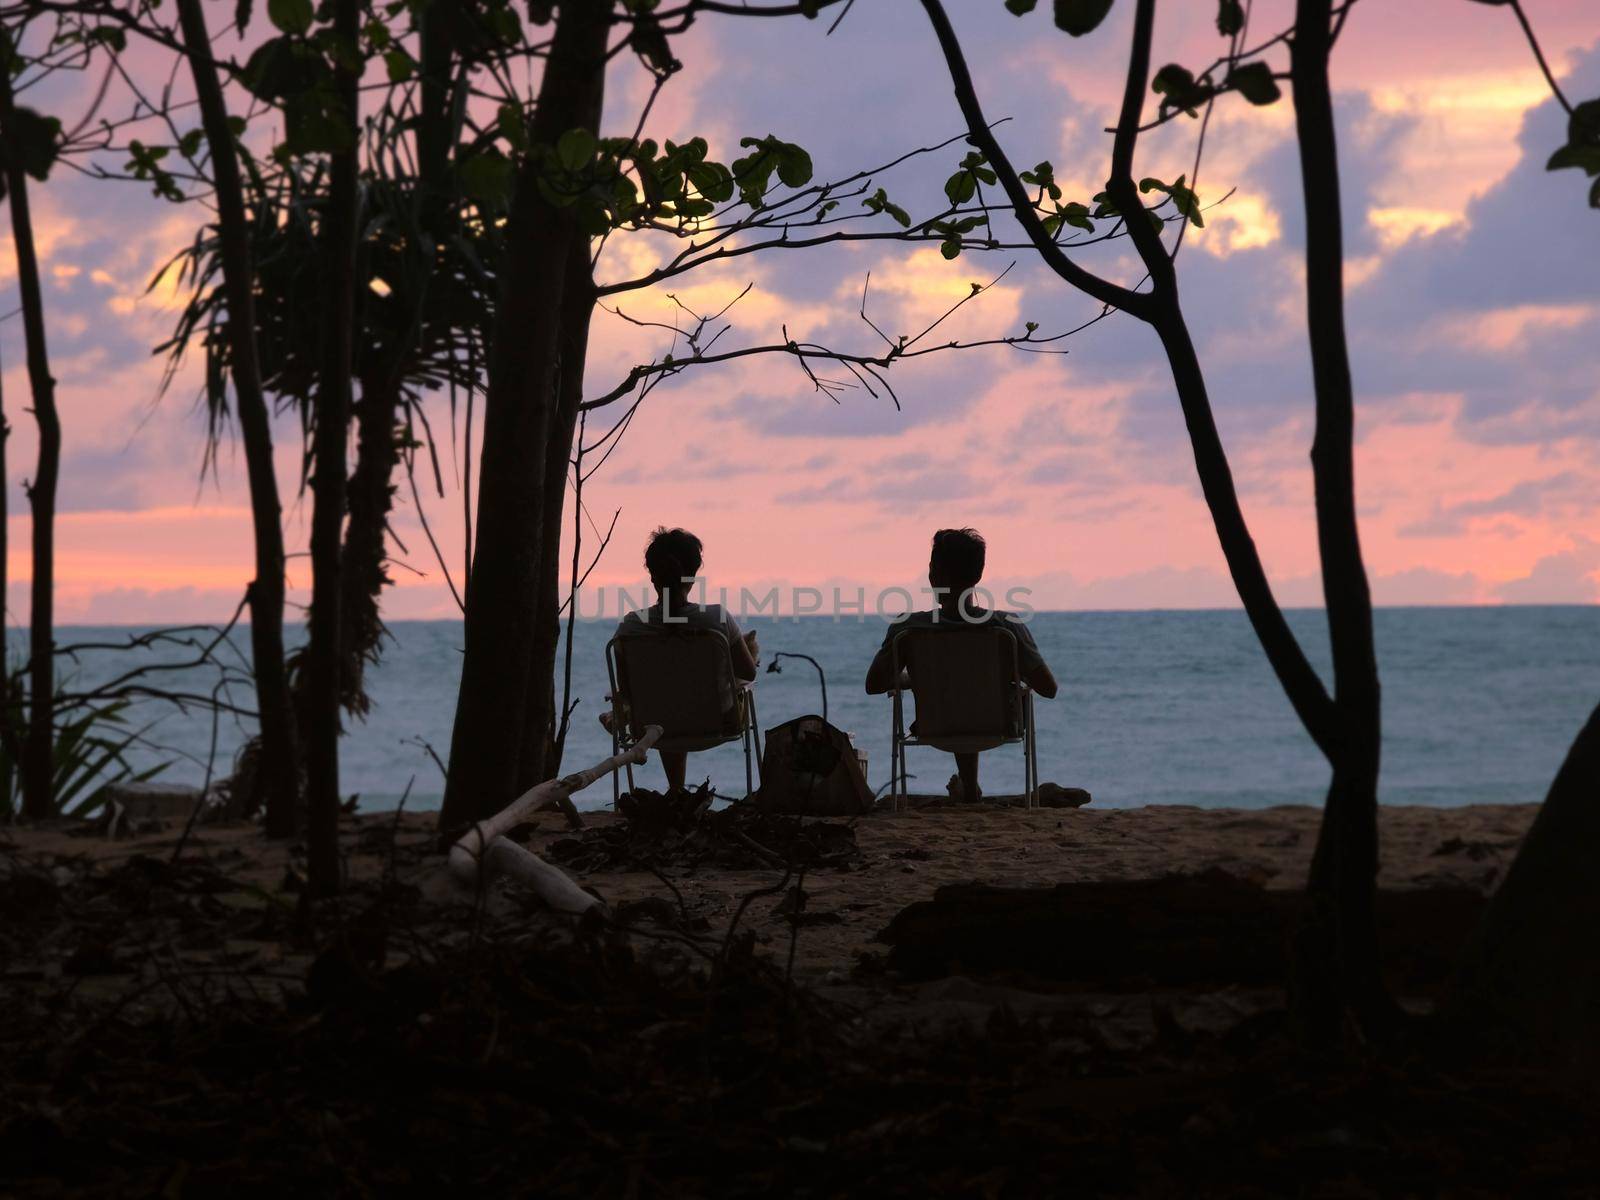 Couples sit and watch the sunset by the sea. Silhouettes of women and men sitting on a bench watching the serene sunset over the ocean. Relaxation and vacation travel concept